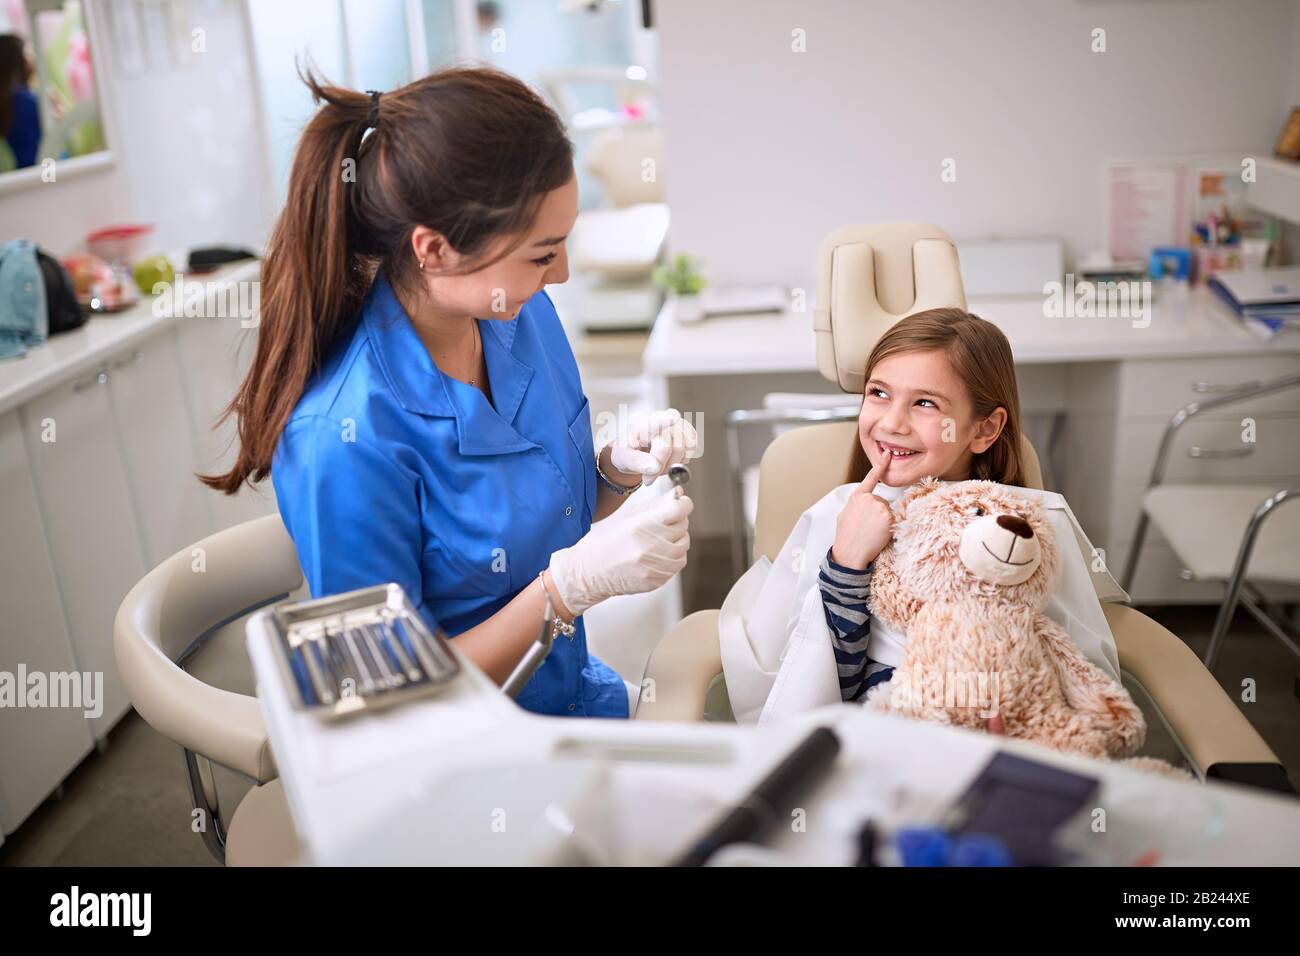 Smiling girl in dental chair showing tooth to dentist Stock Photo